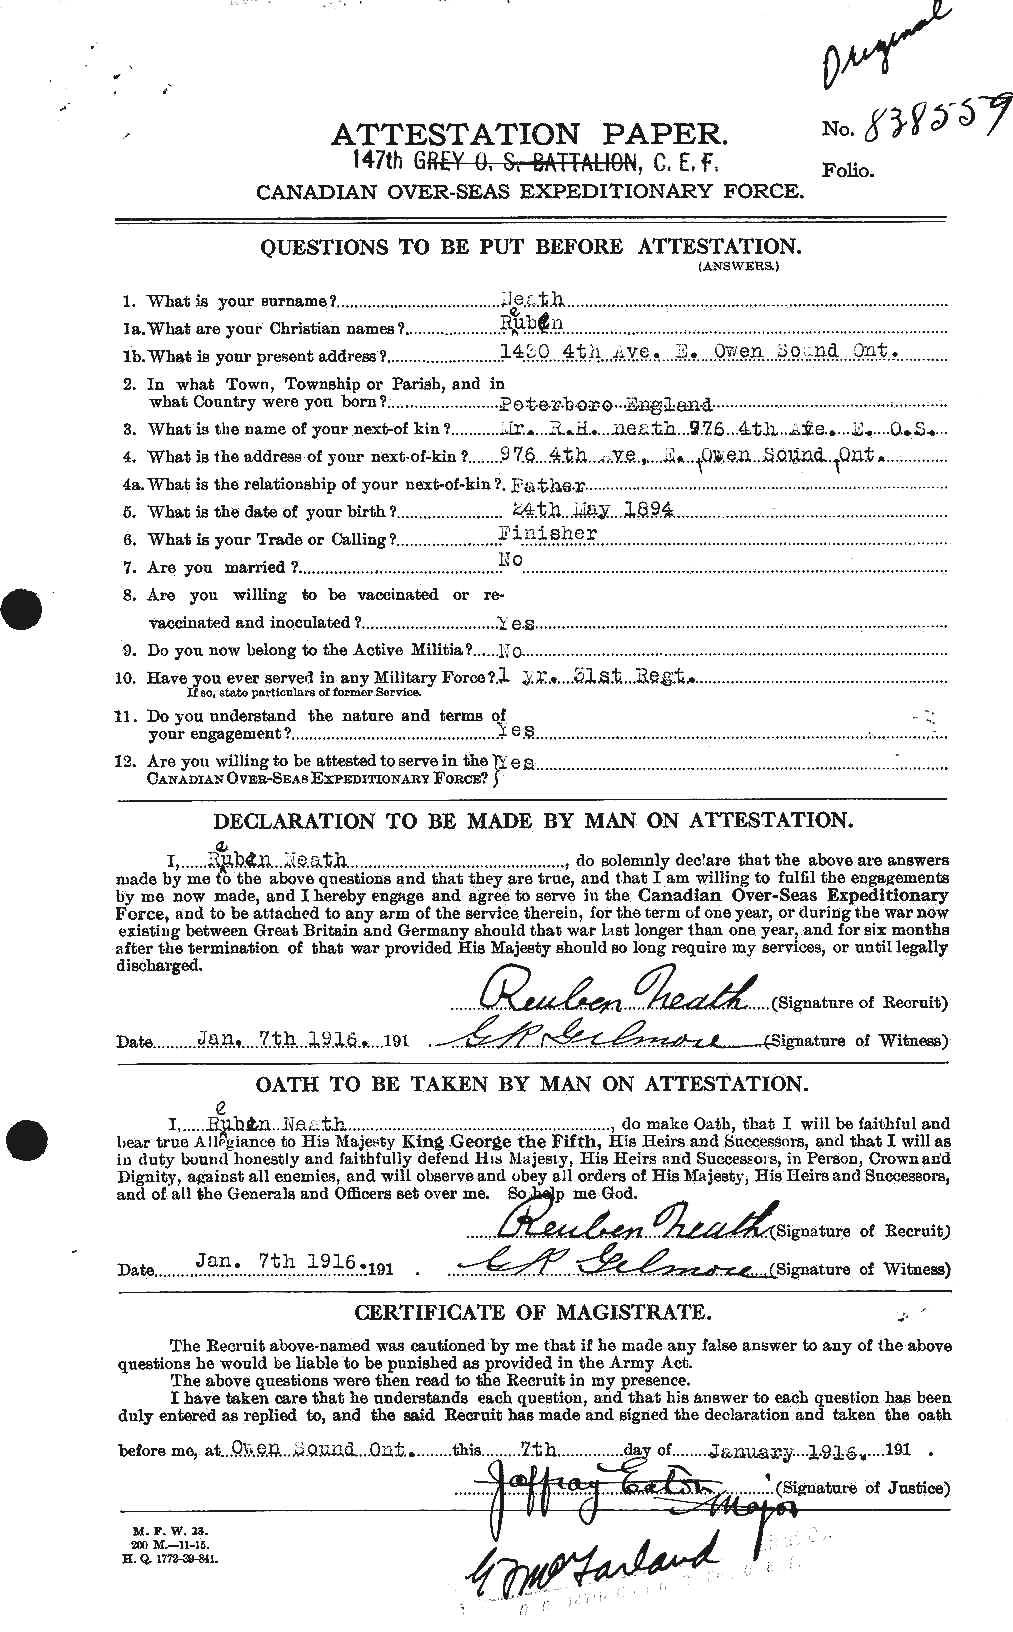 Personnel Records of the First World War - CEF 545072a